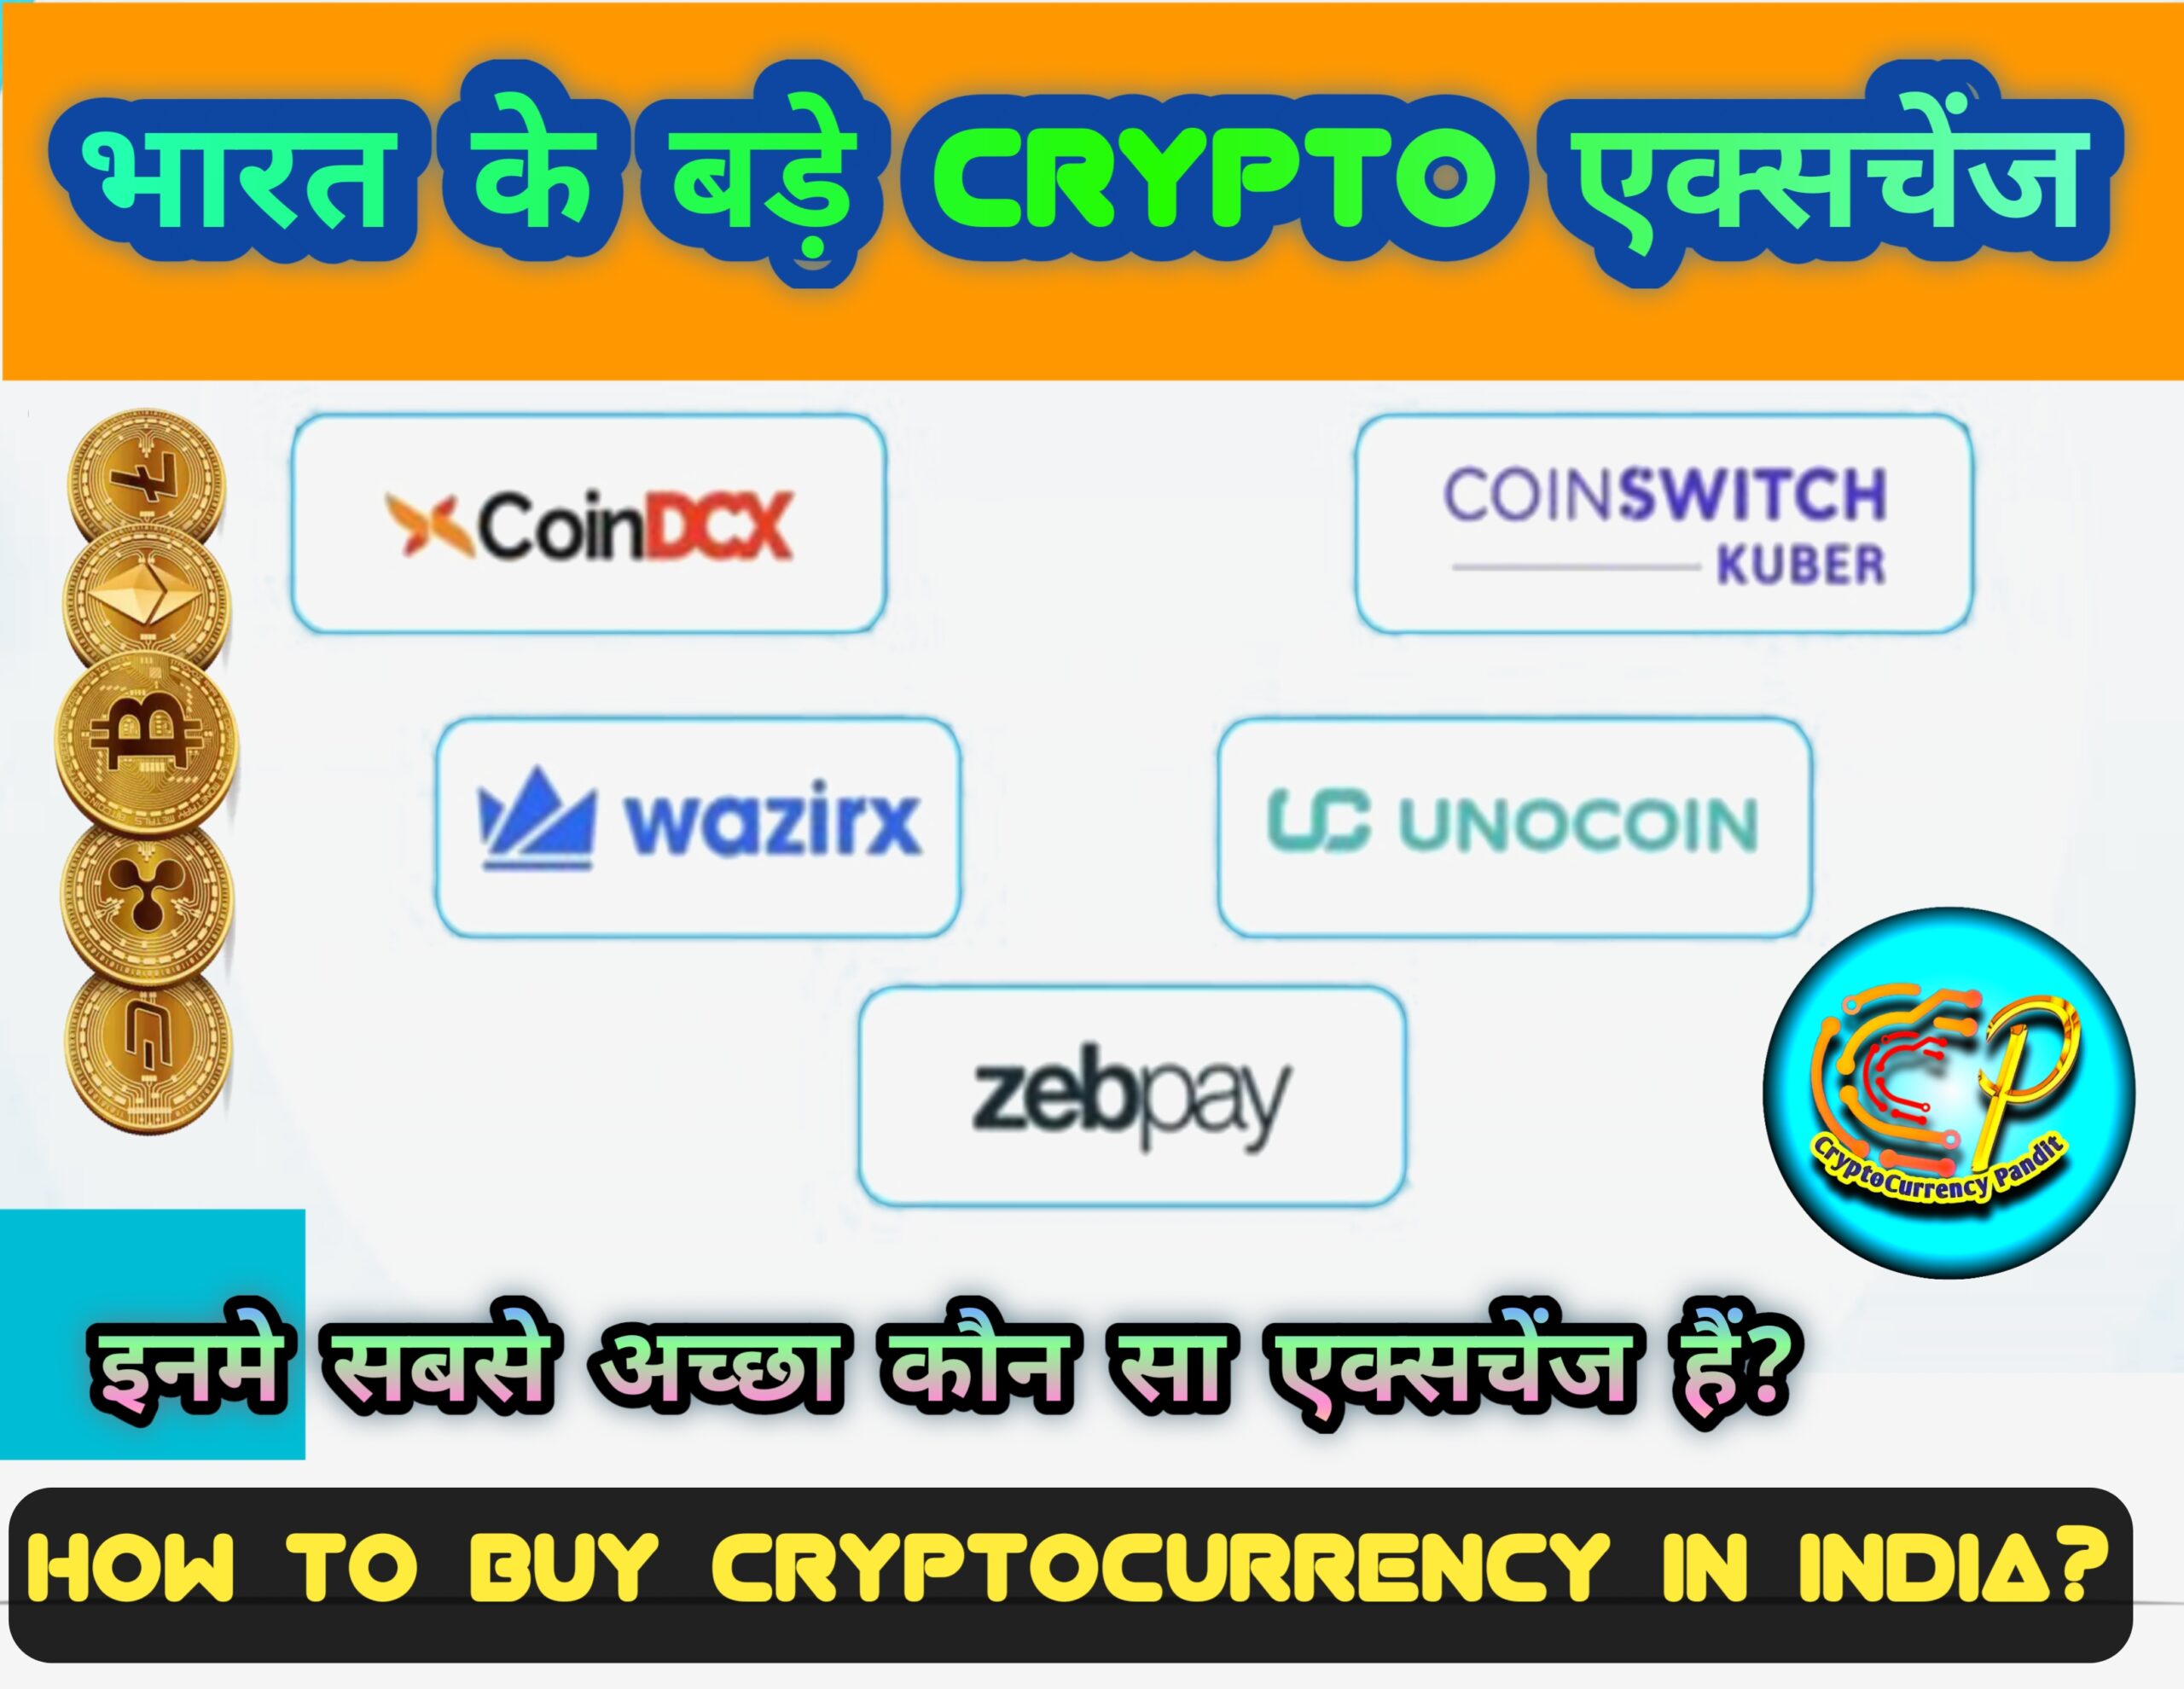 The Best CryptoCurrency Exchange of India Crypto Currency Pandit